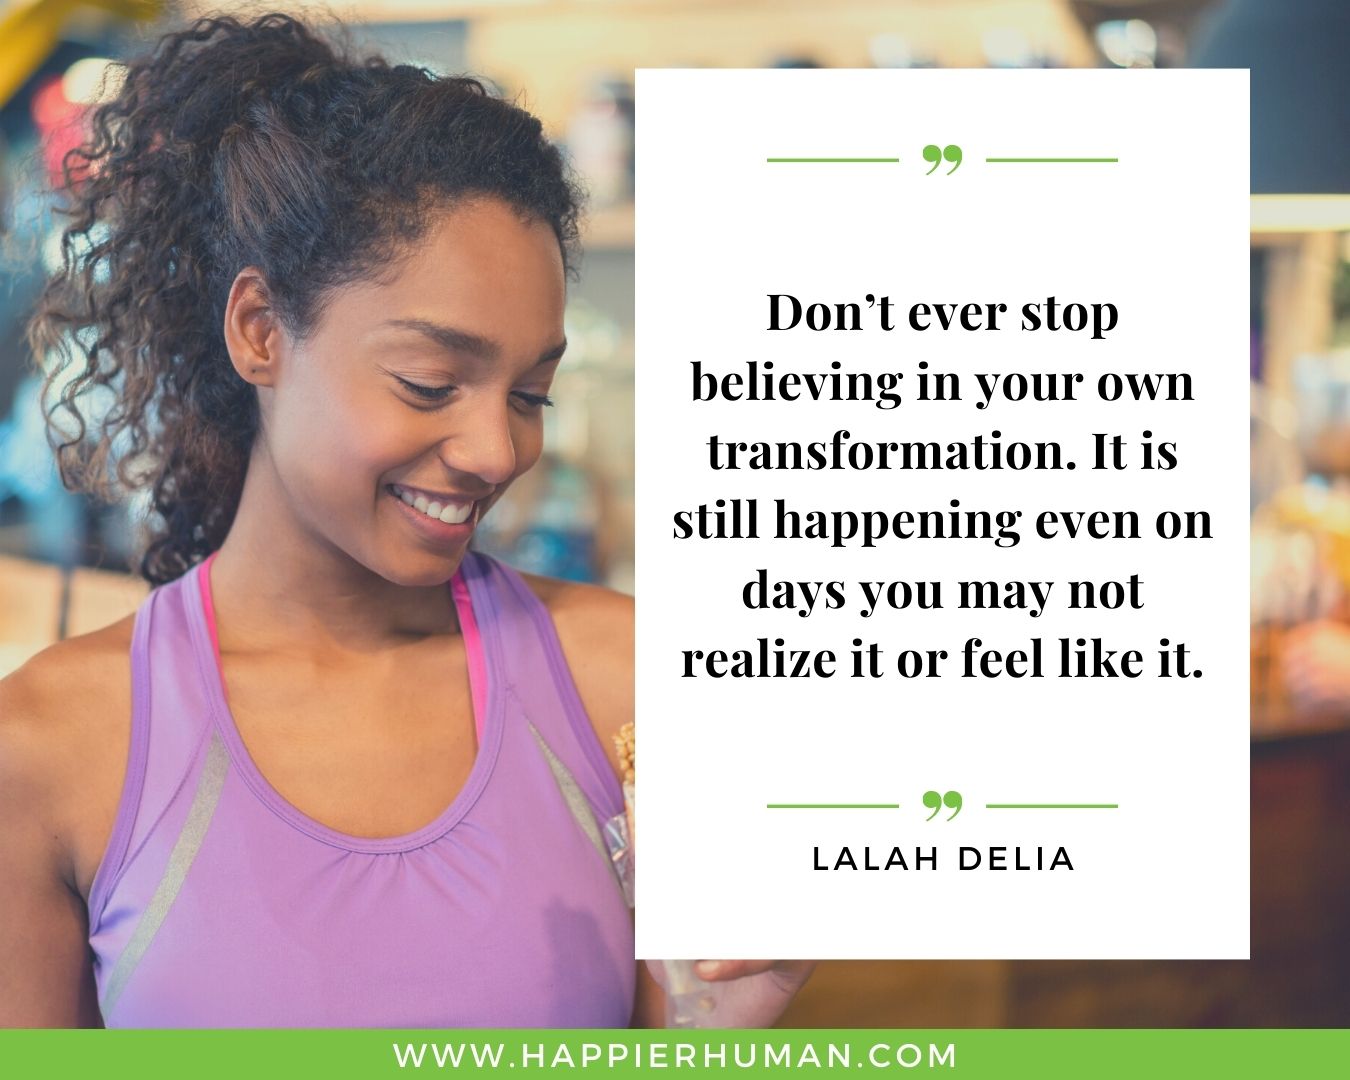 Toxic People Quotes - “Don’t ever stop believing in your own transformation. It is still happening even on days you may not realize it or feel like it.” – Lalah Delia